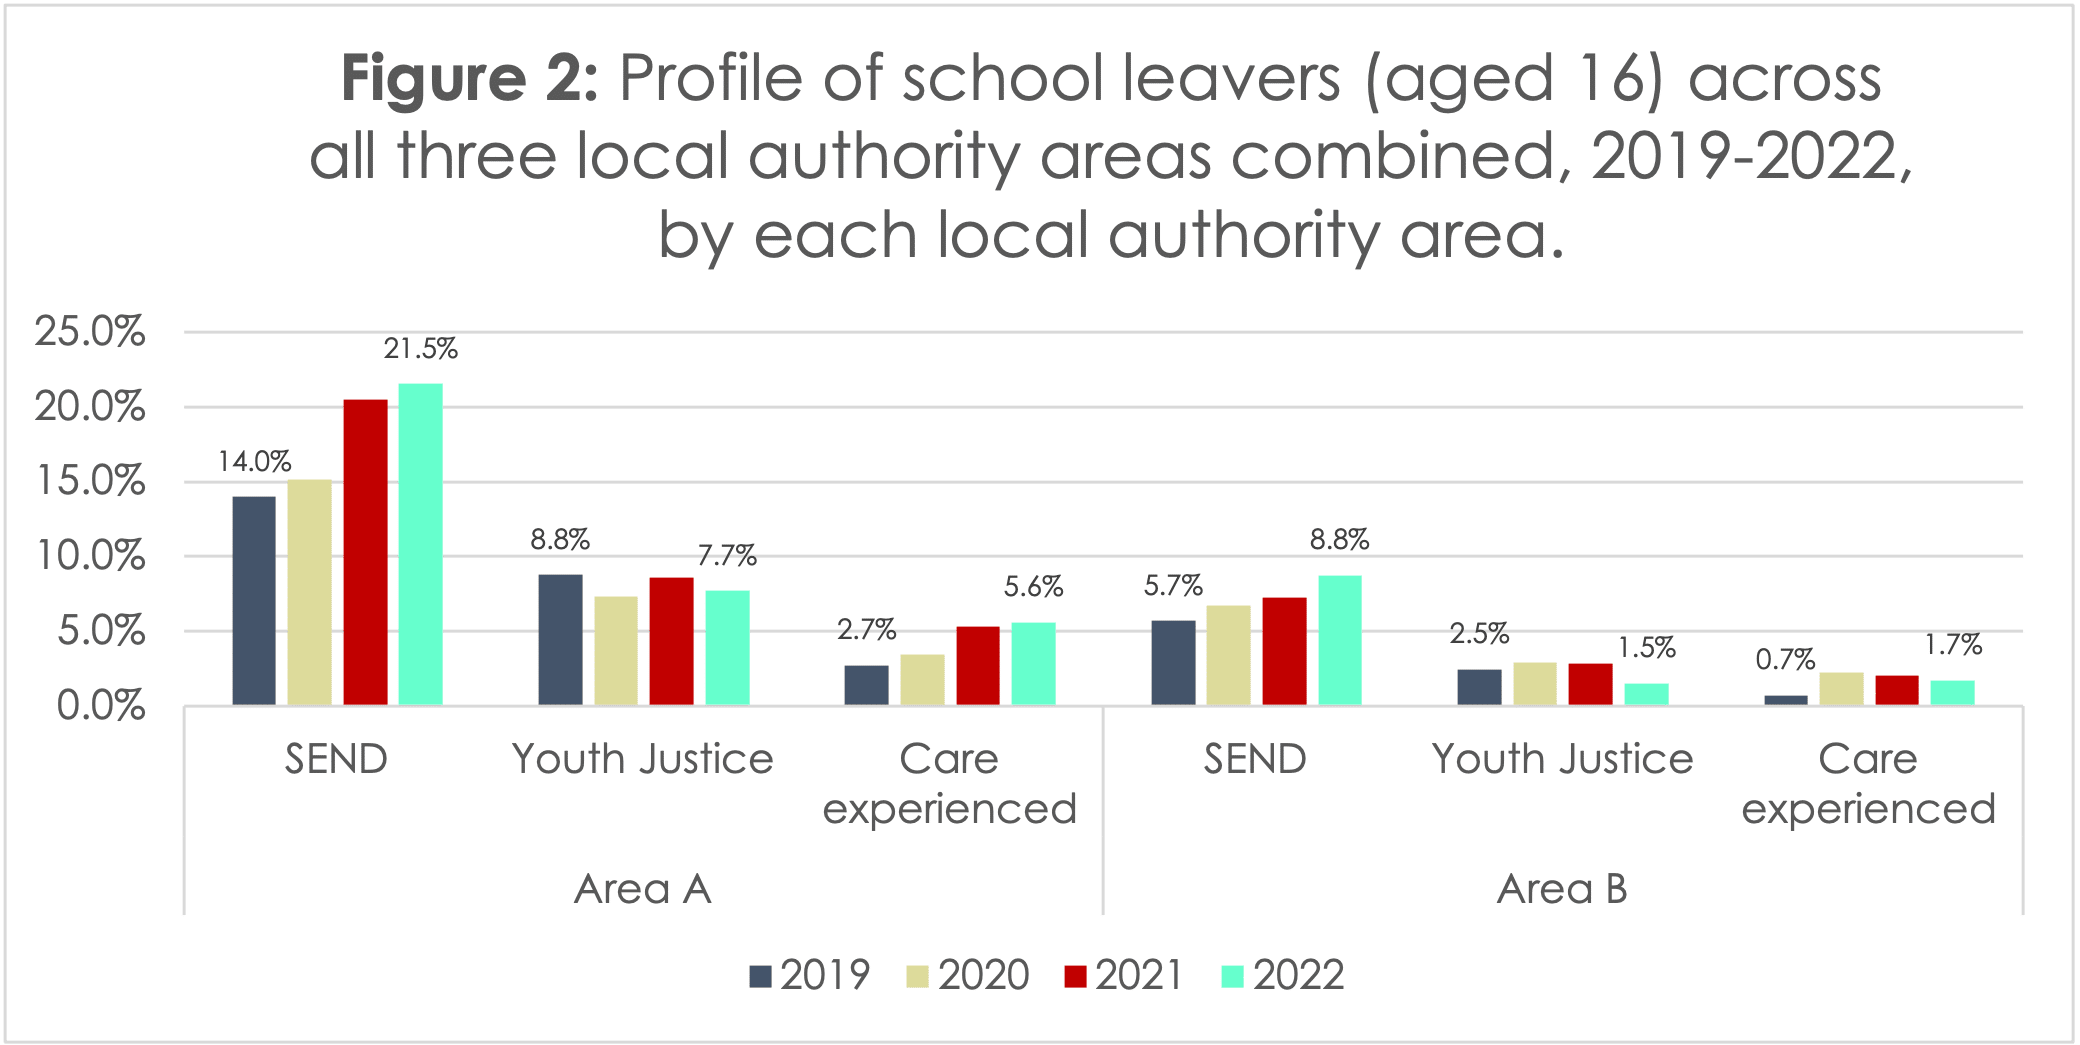 Figure 2 shows this data by individual local authority. Although the trends are similar across the two areas, there are major differences in the magnitude of the changes between 2019 and 2022. The data is detailed in the accompanying report.